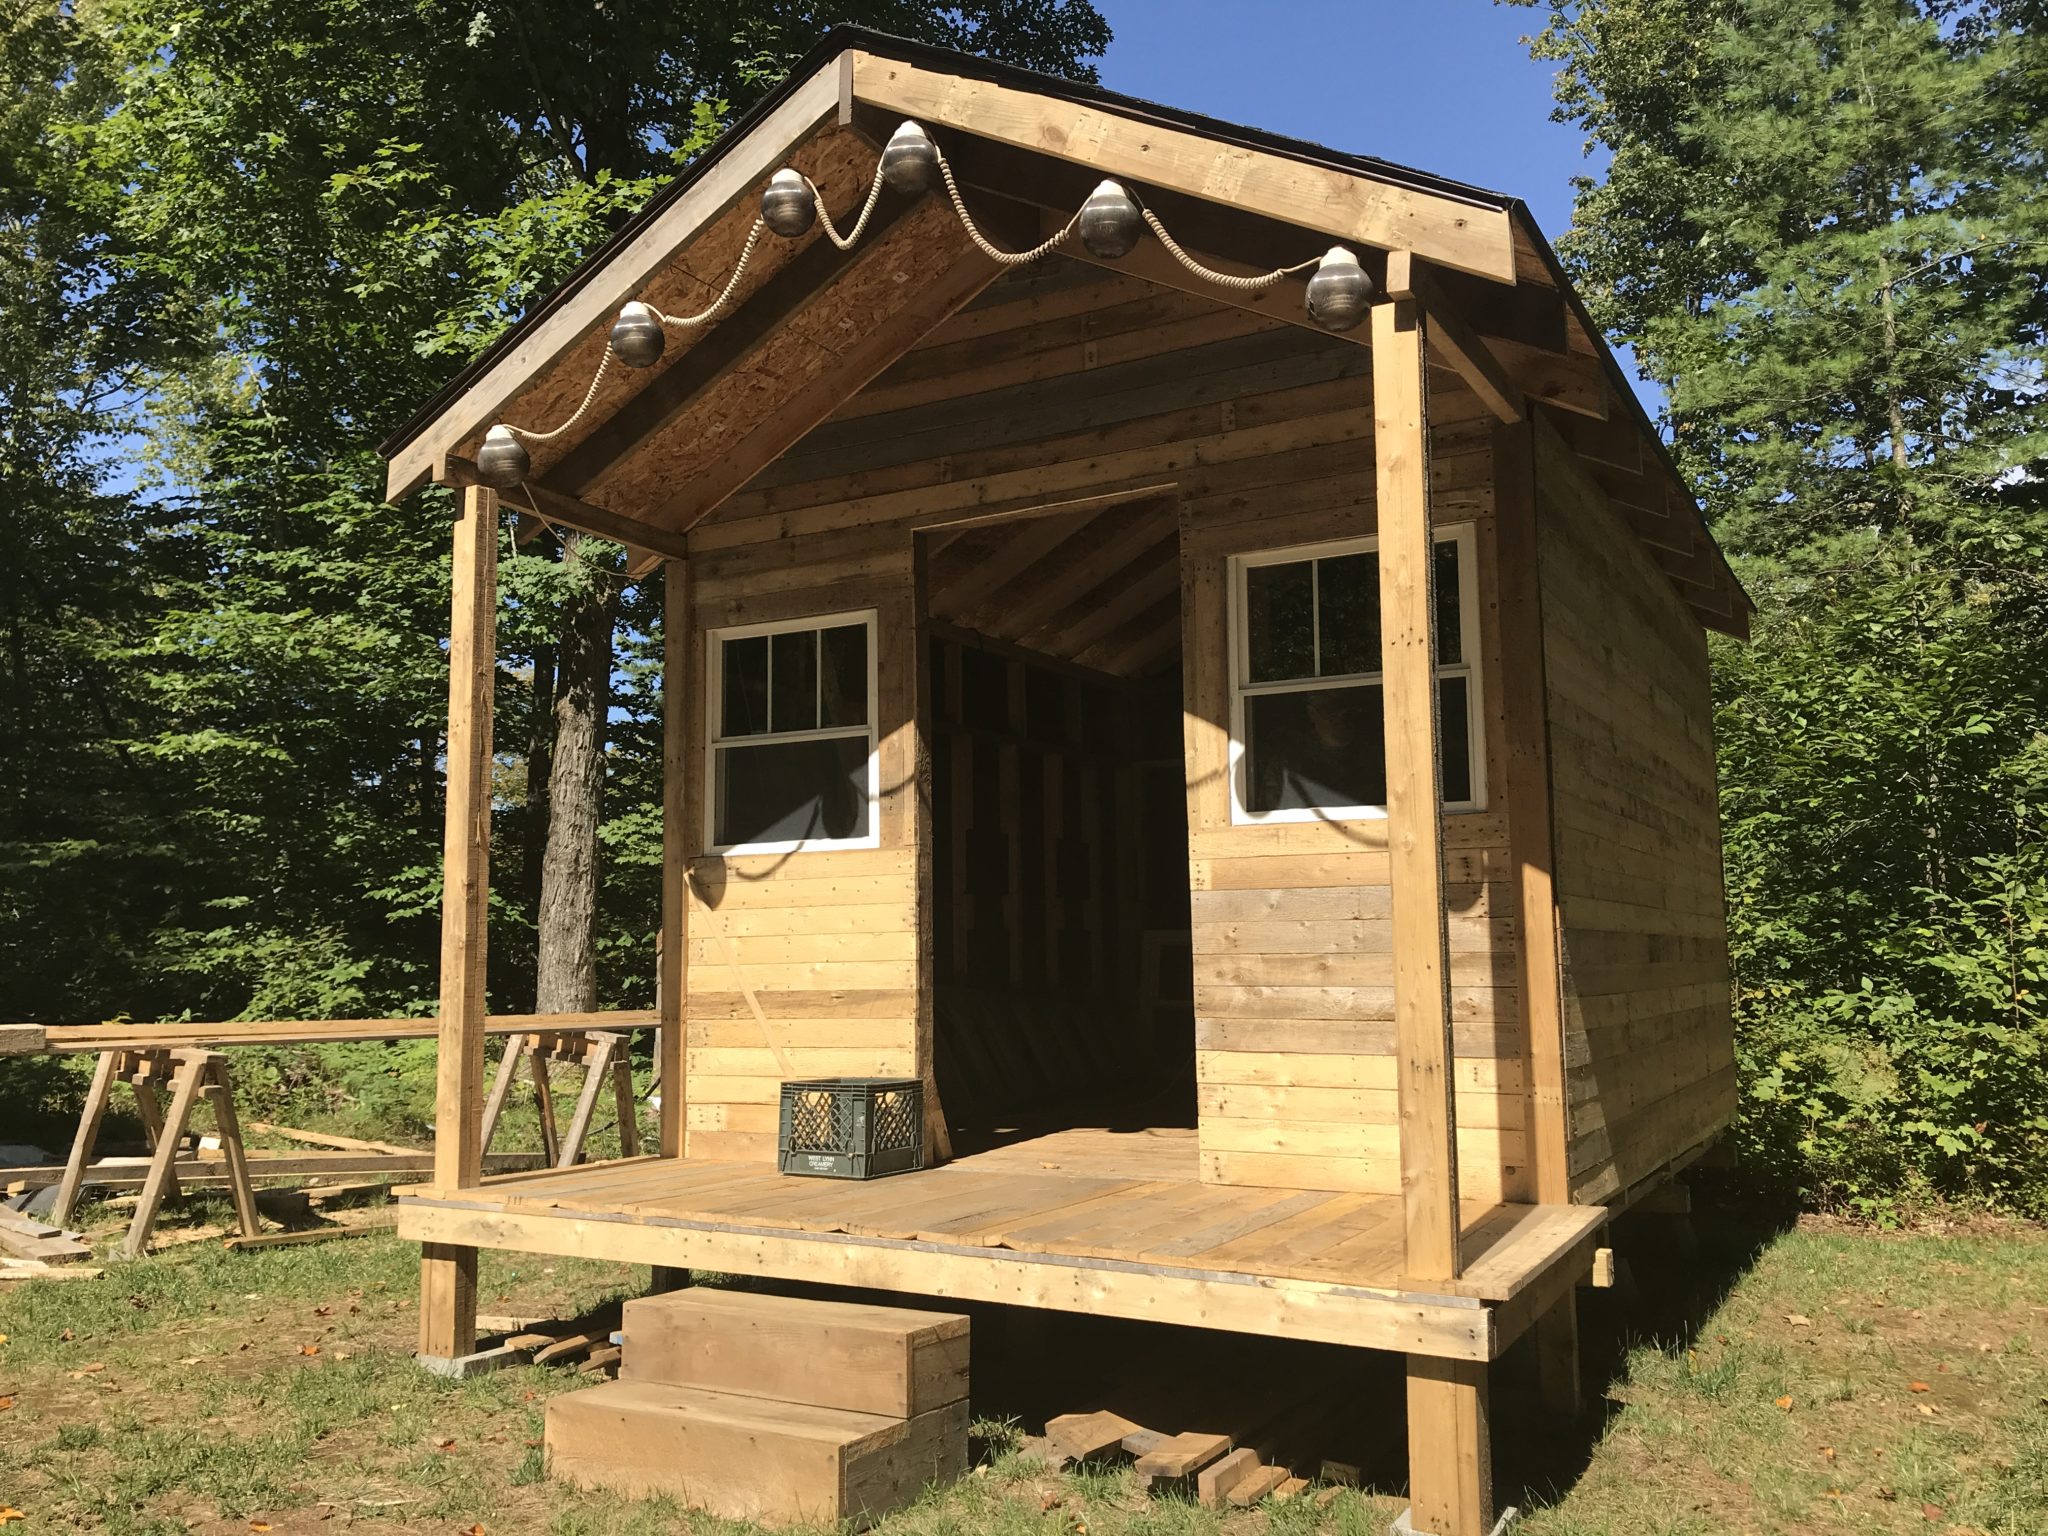 Free Pallet Cabin - Want to build this? - Pallet Hobby